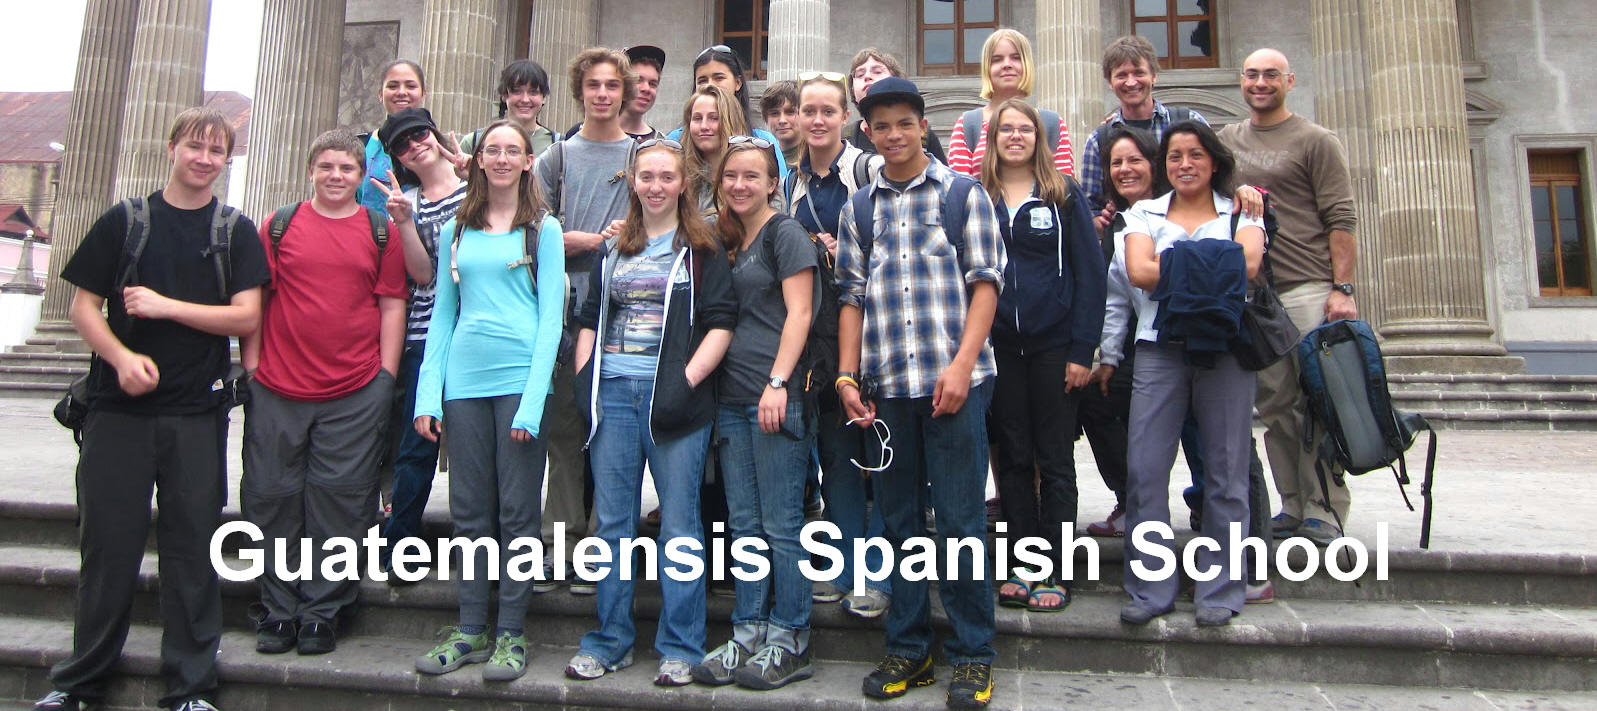 Many groups of high school students from the USA come to Guatemalensis Spanish School to learn the Spanish Language because of its high standards of quality of teaching.